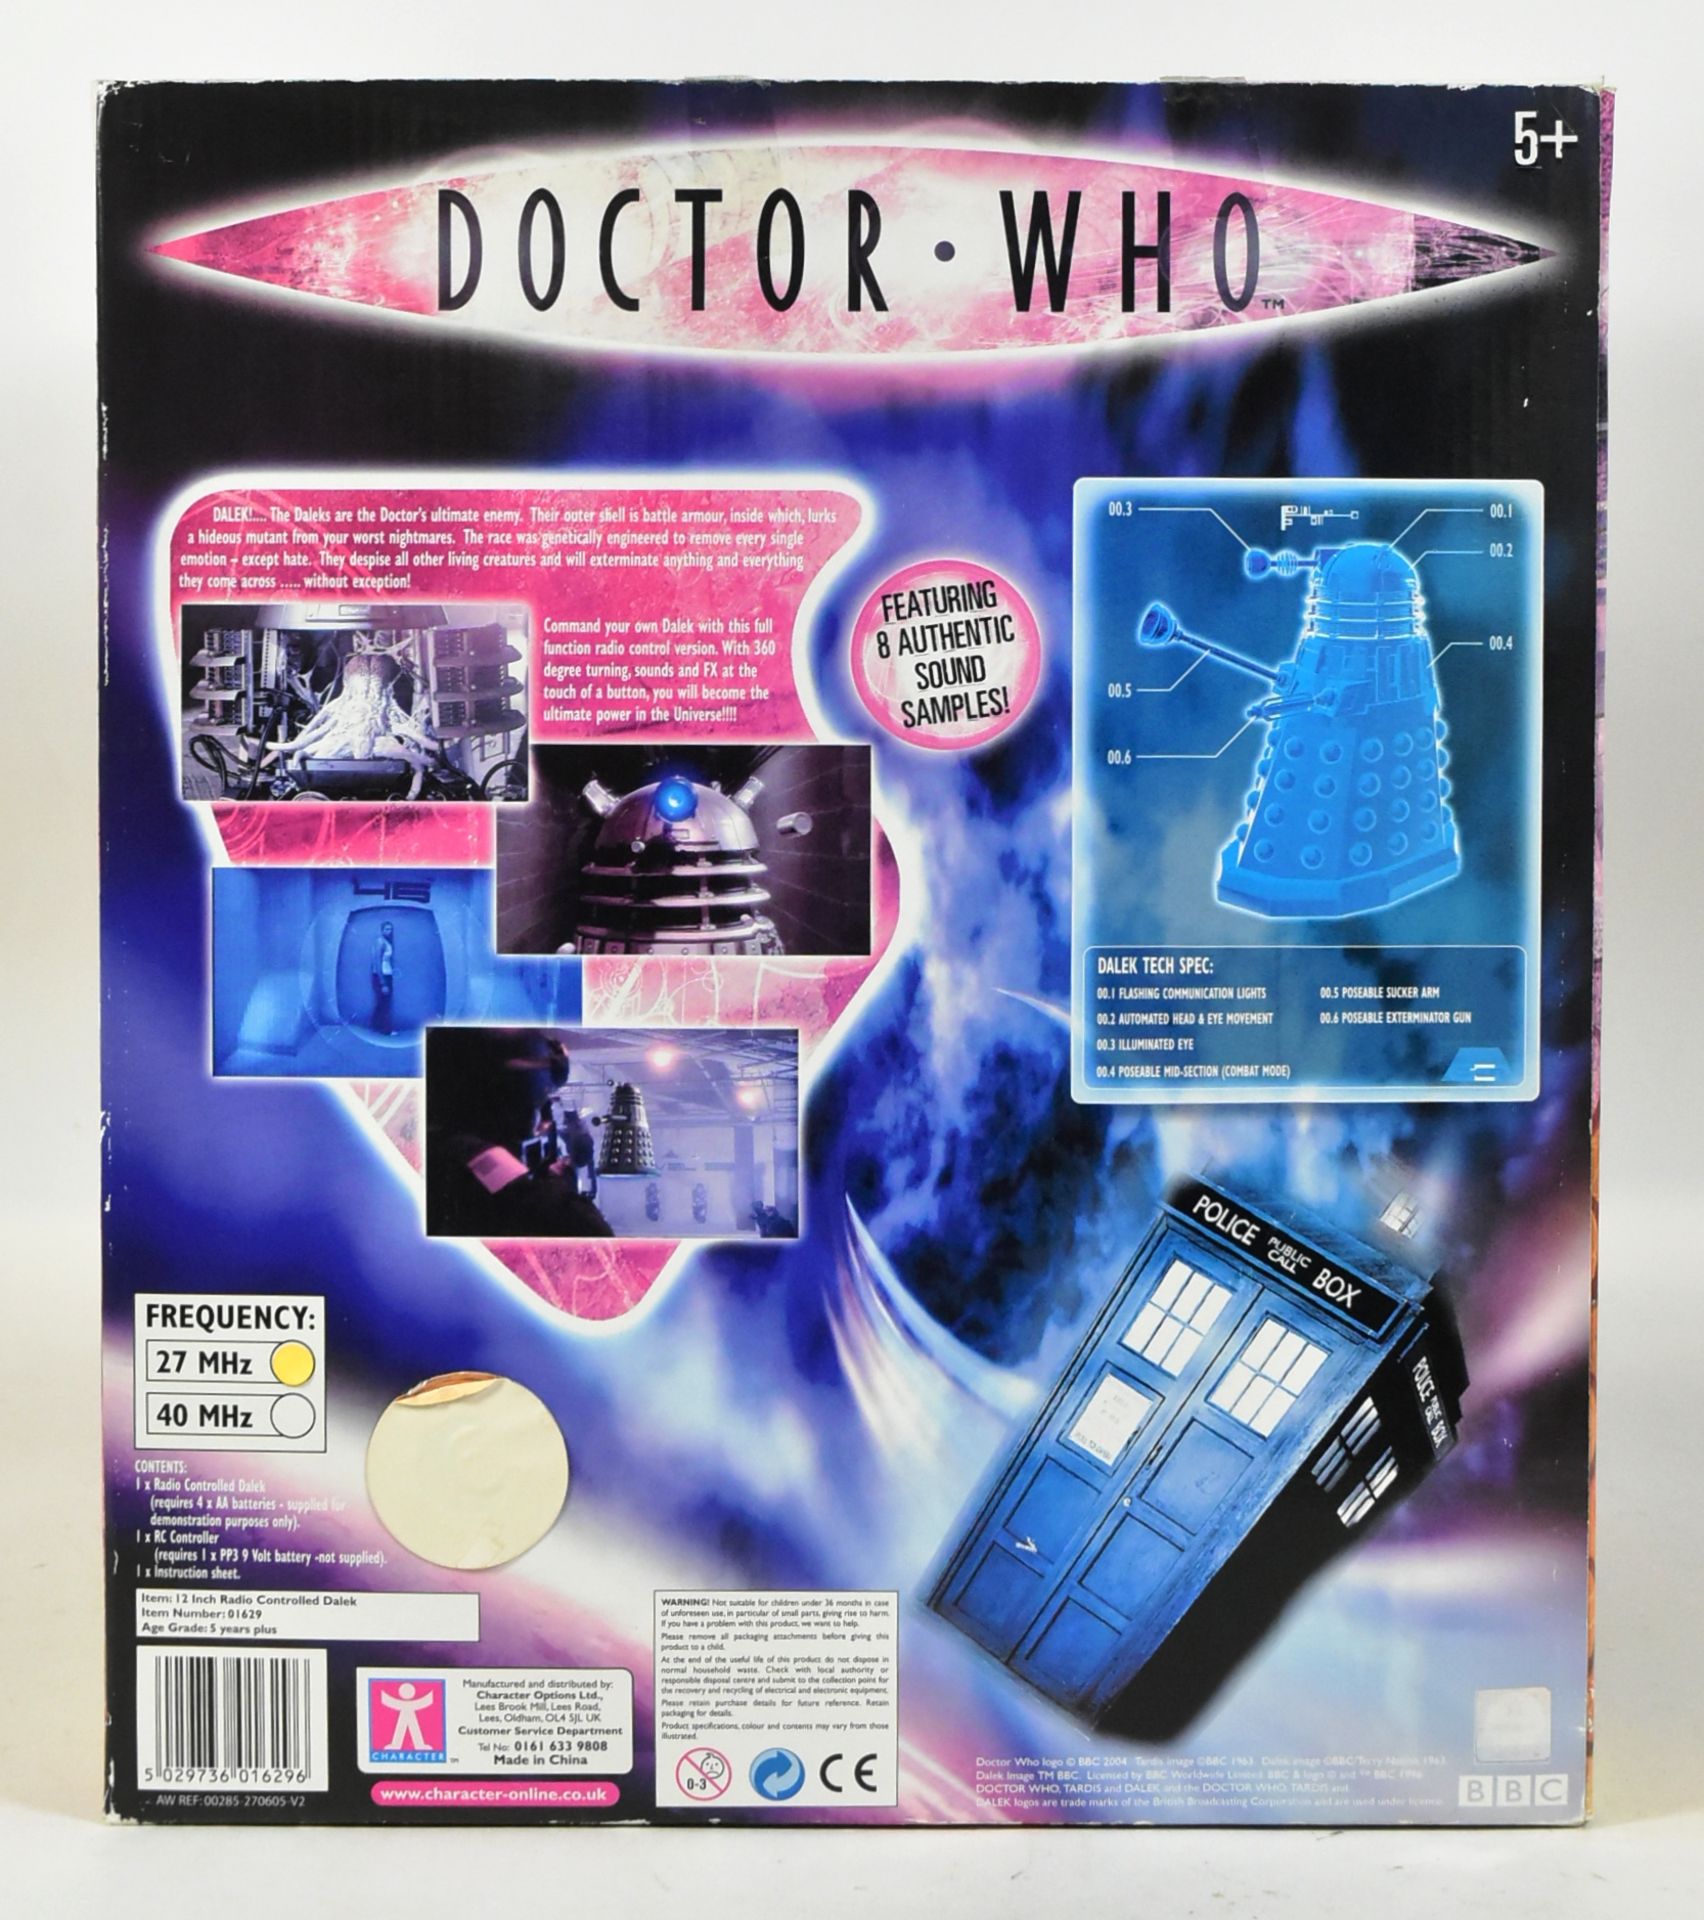 DOCTOR WHO - CHARACTER - LARGE SCALE RADIO CONTROLLED DALEK - Image 3 of 3